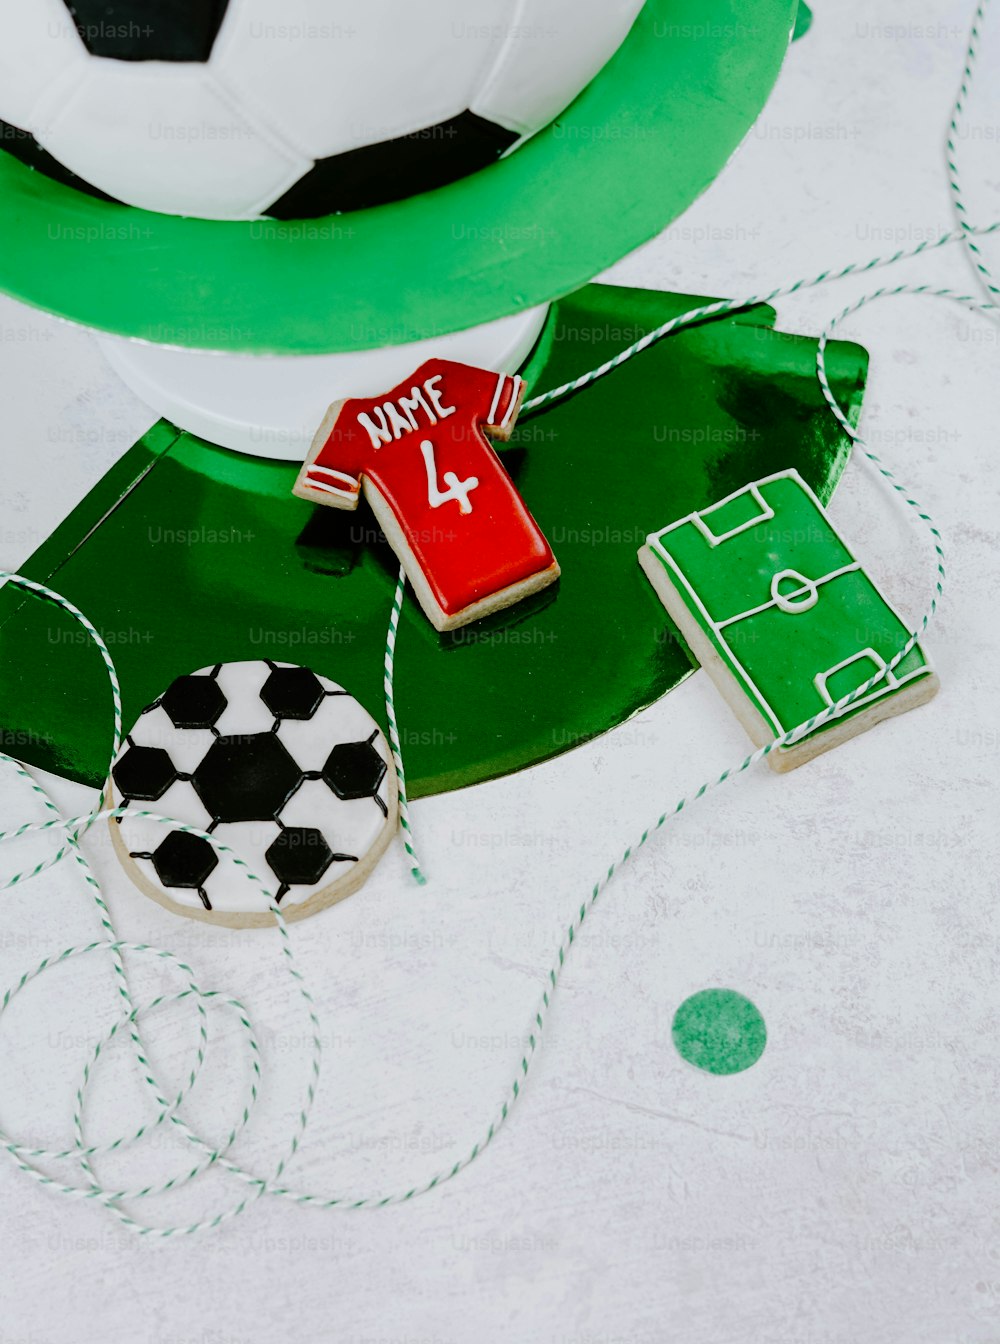 a cake decorated with a soccer ball and a name tag